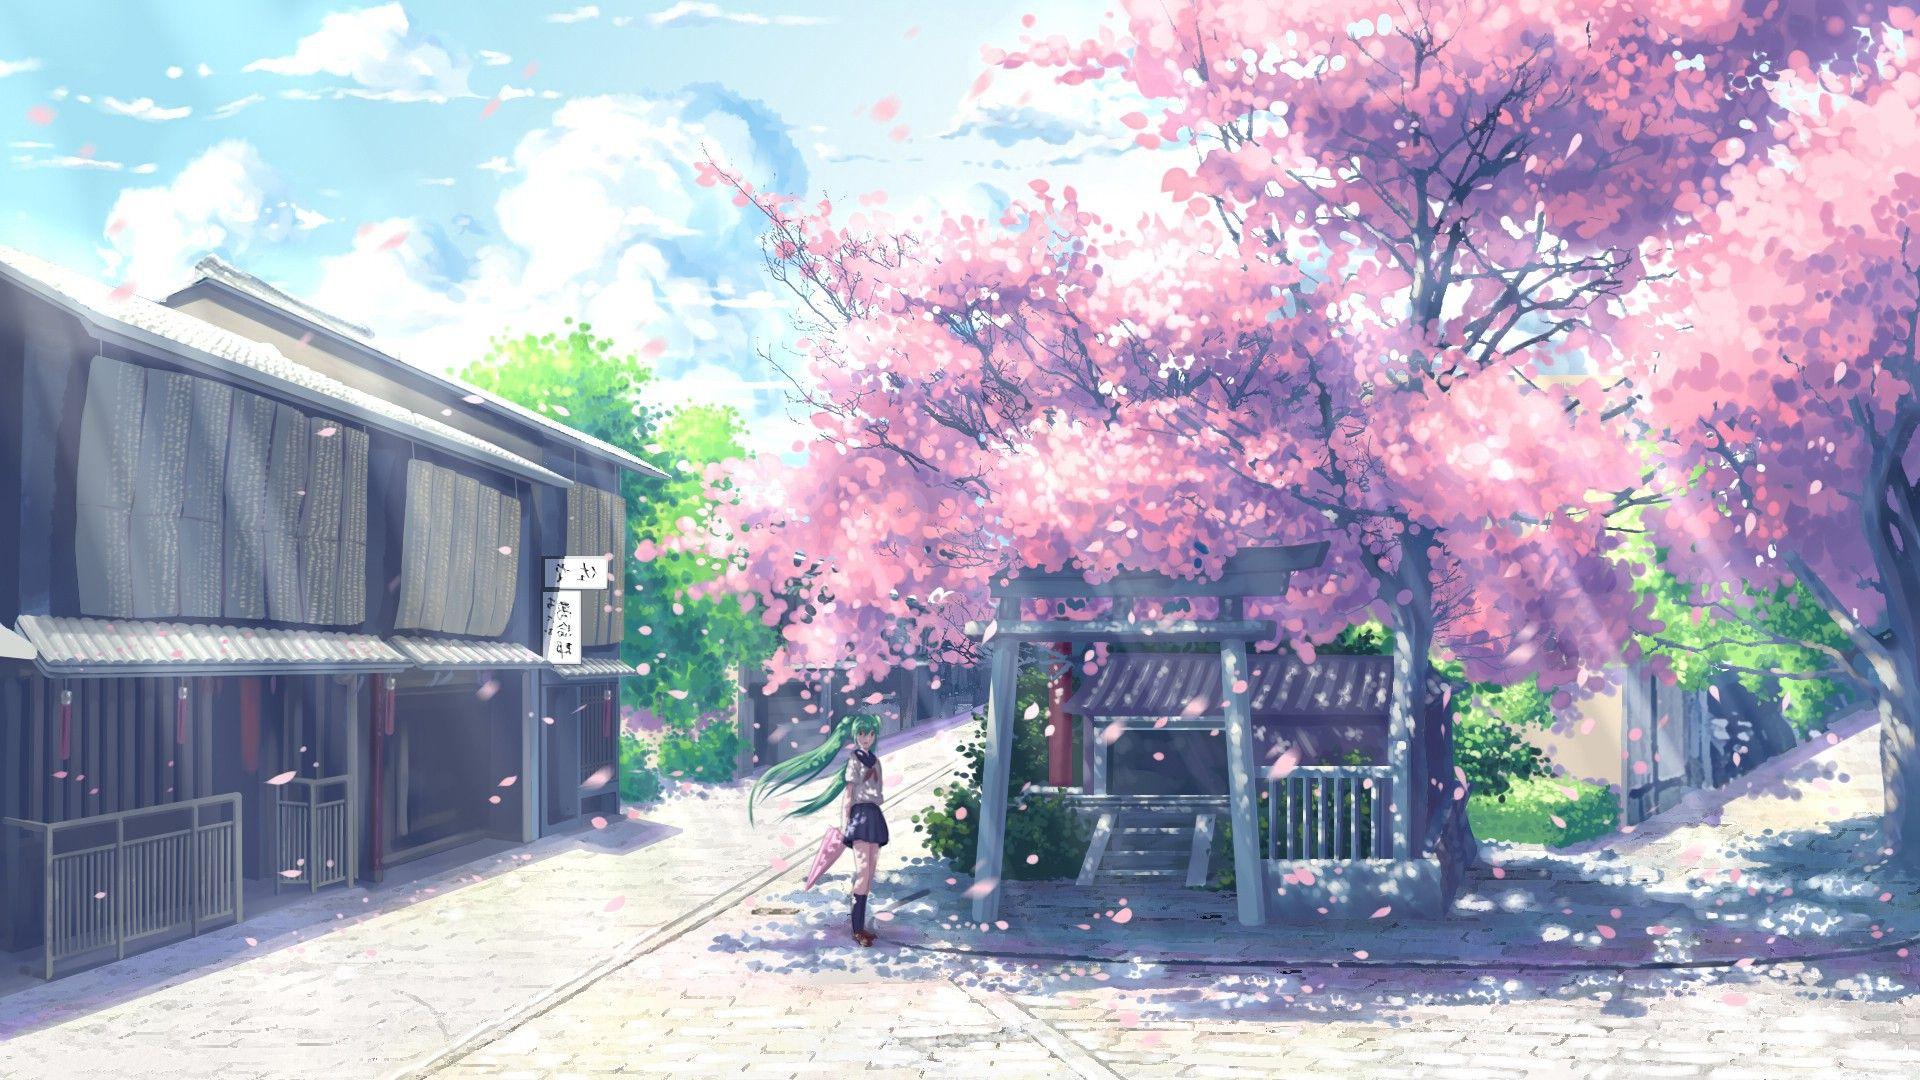 Details 83+ anime location best - awesomeenglish.edu.vn